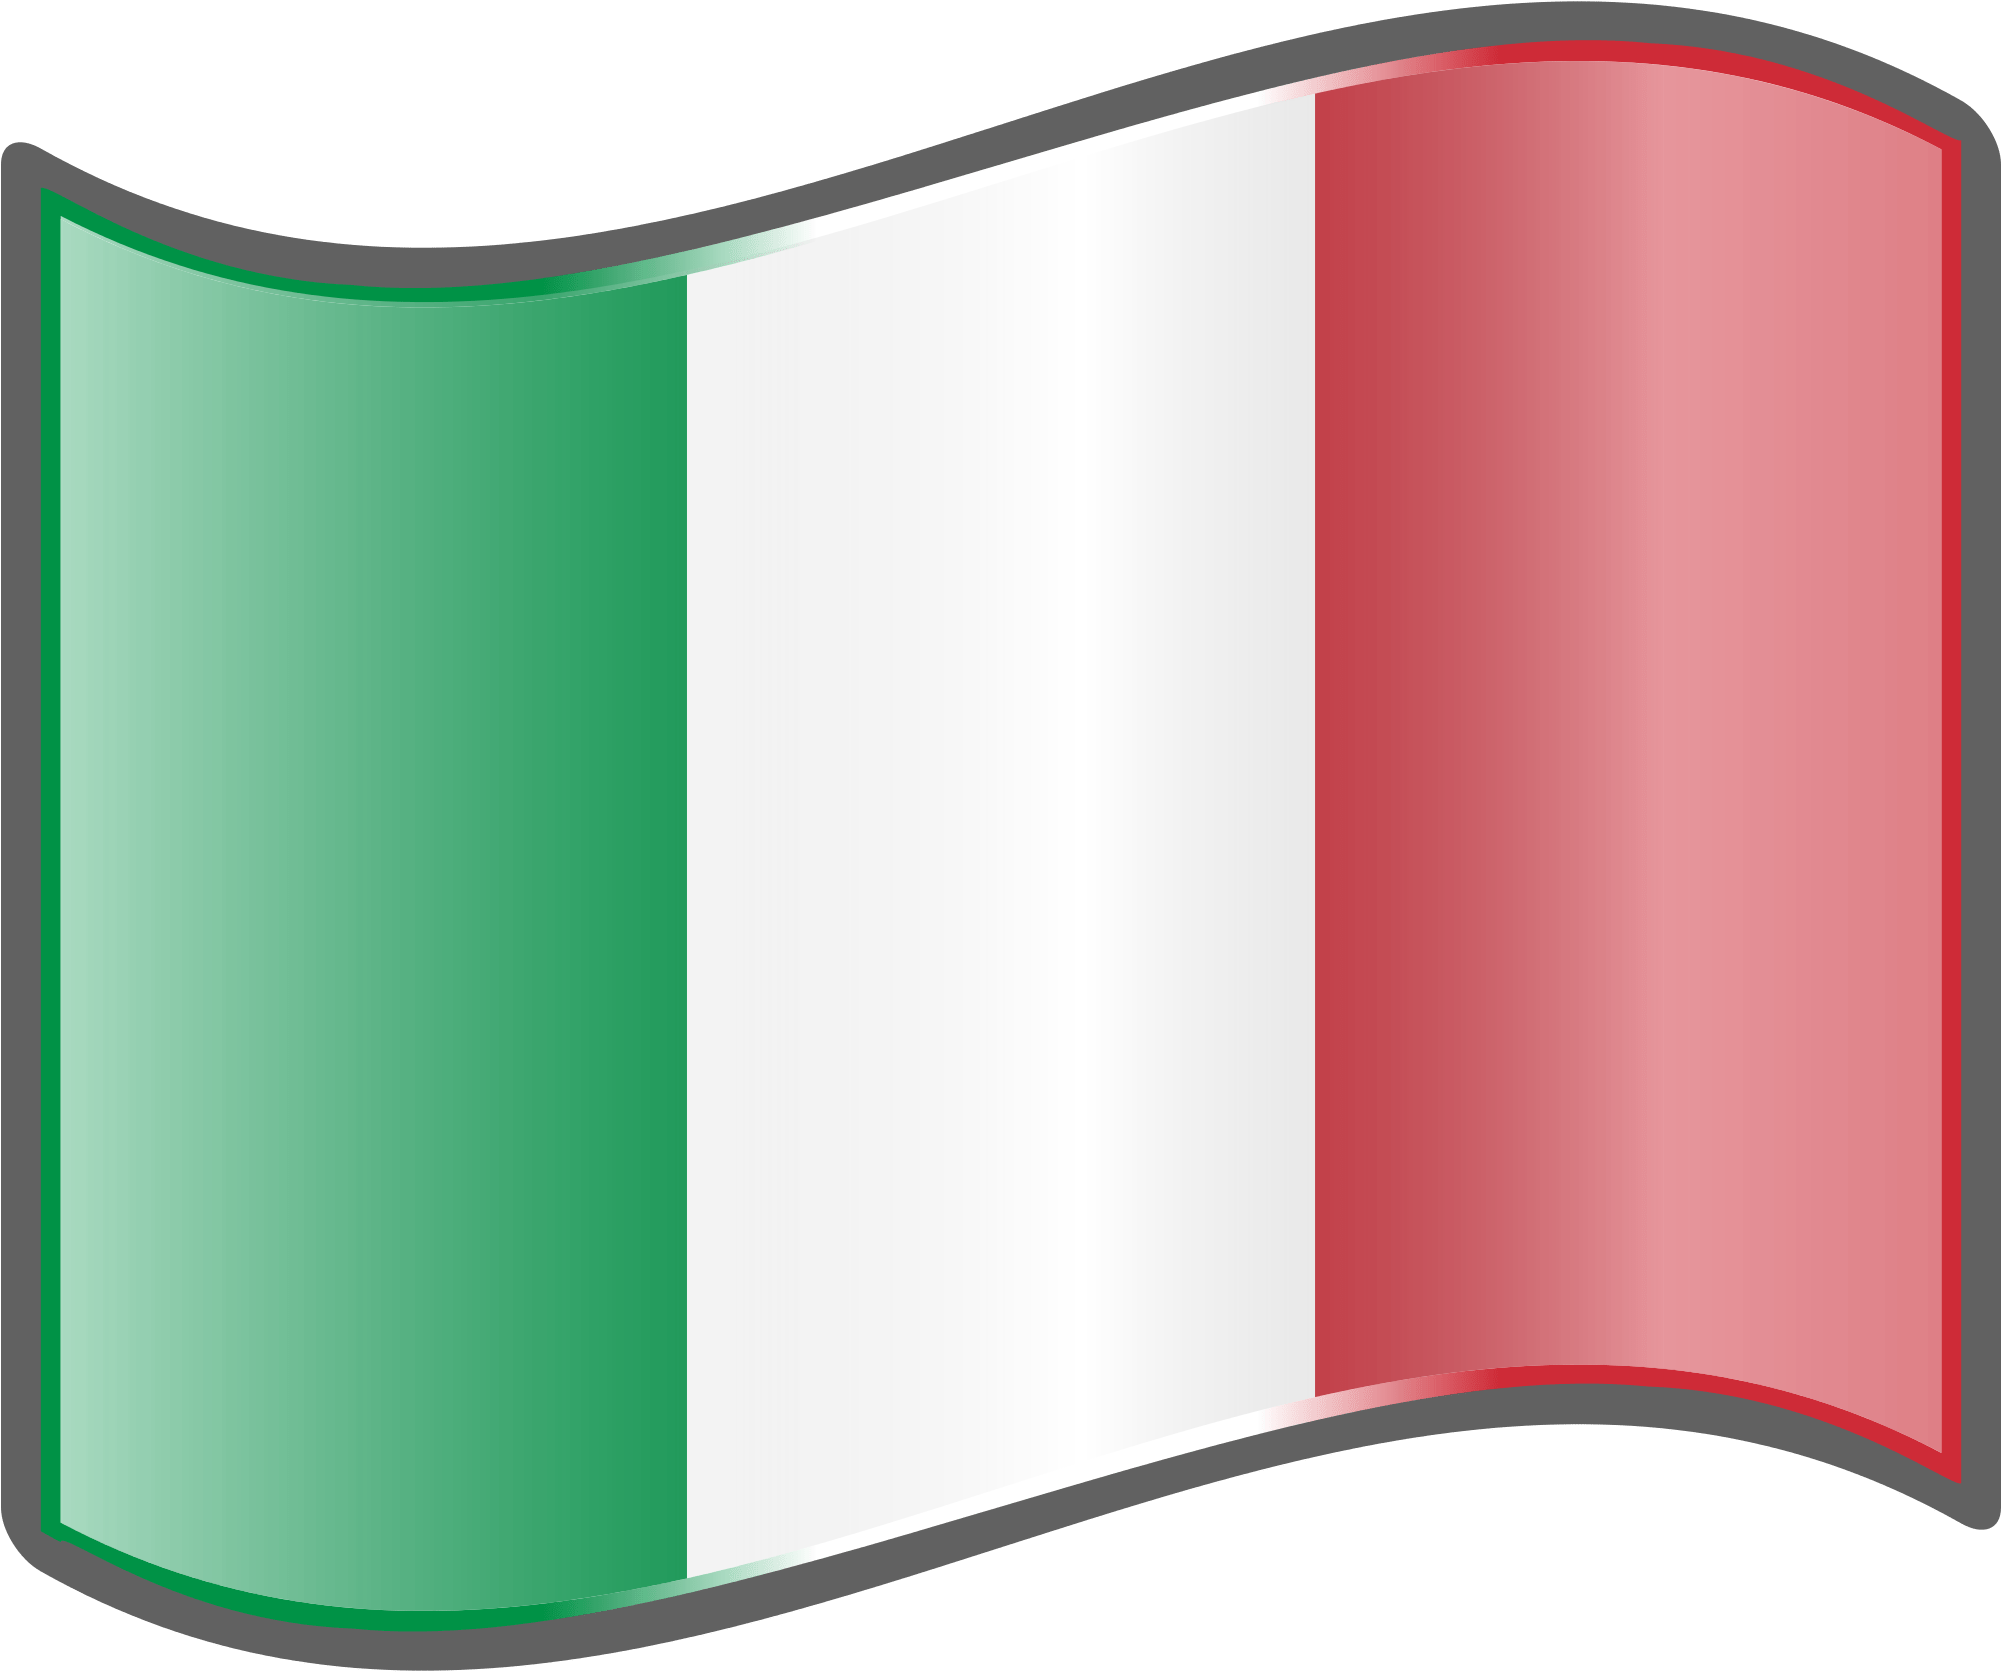 List 100+ Wallpaper Picture Of The Italian Flag Latest